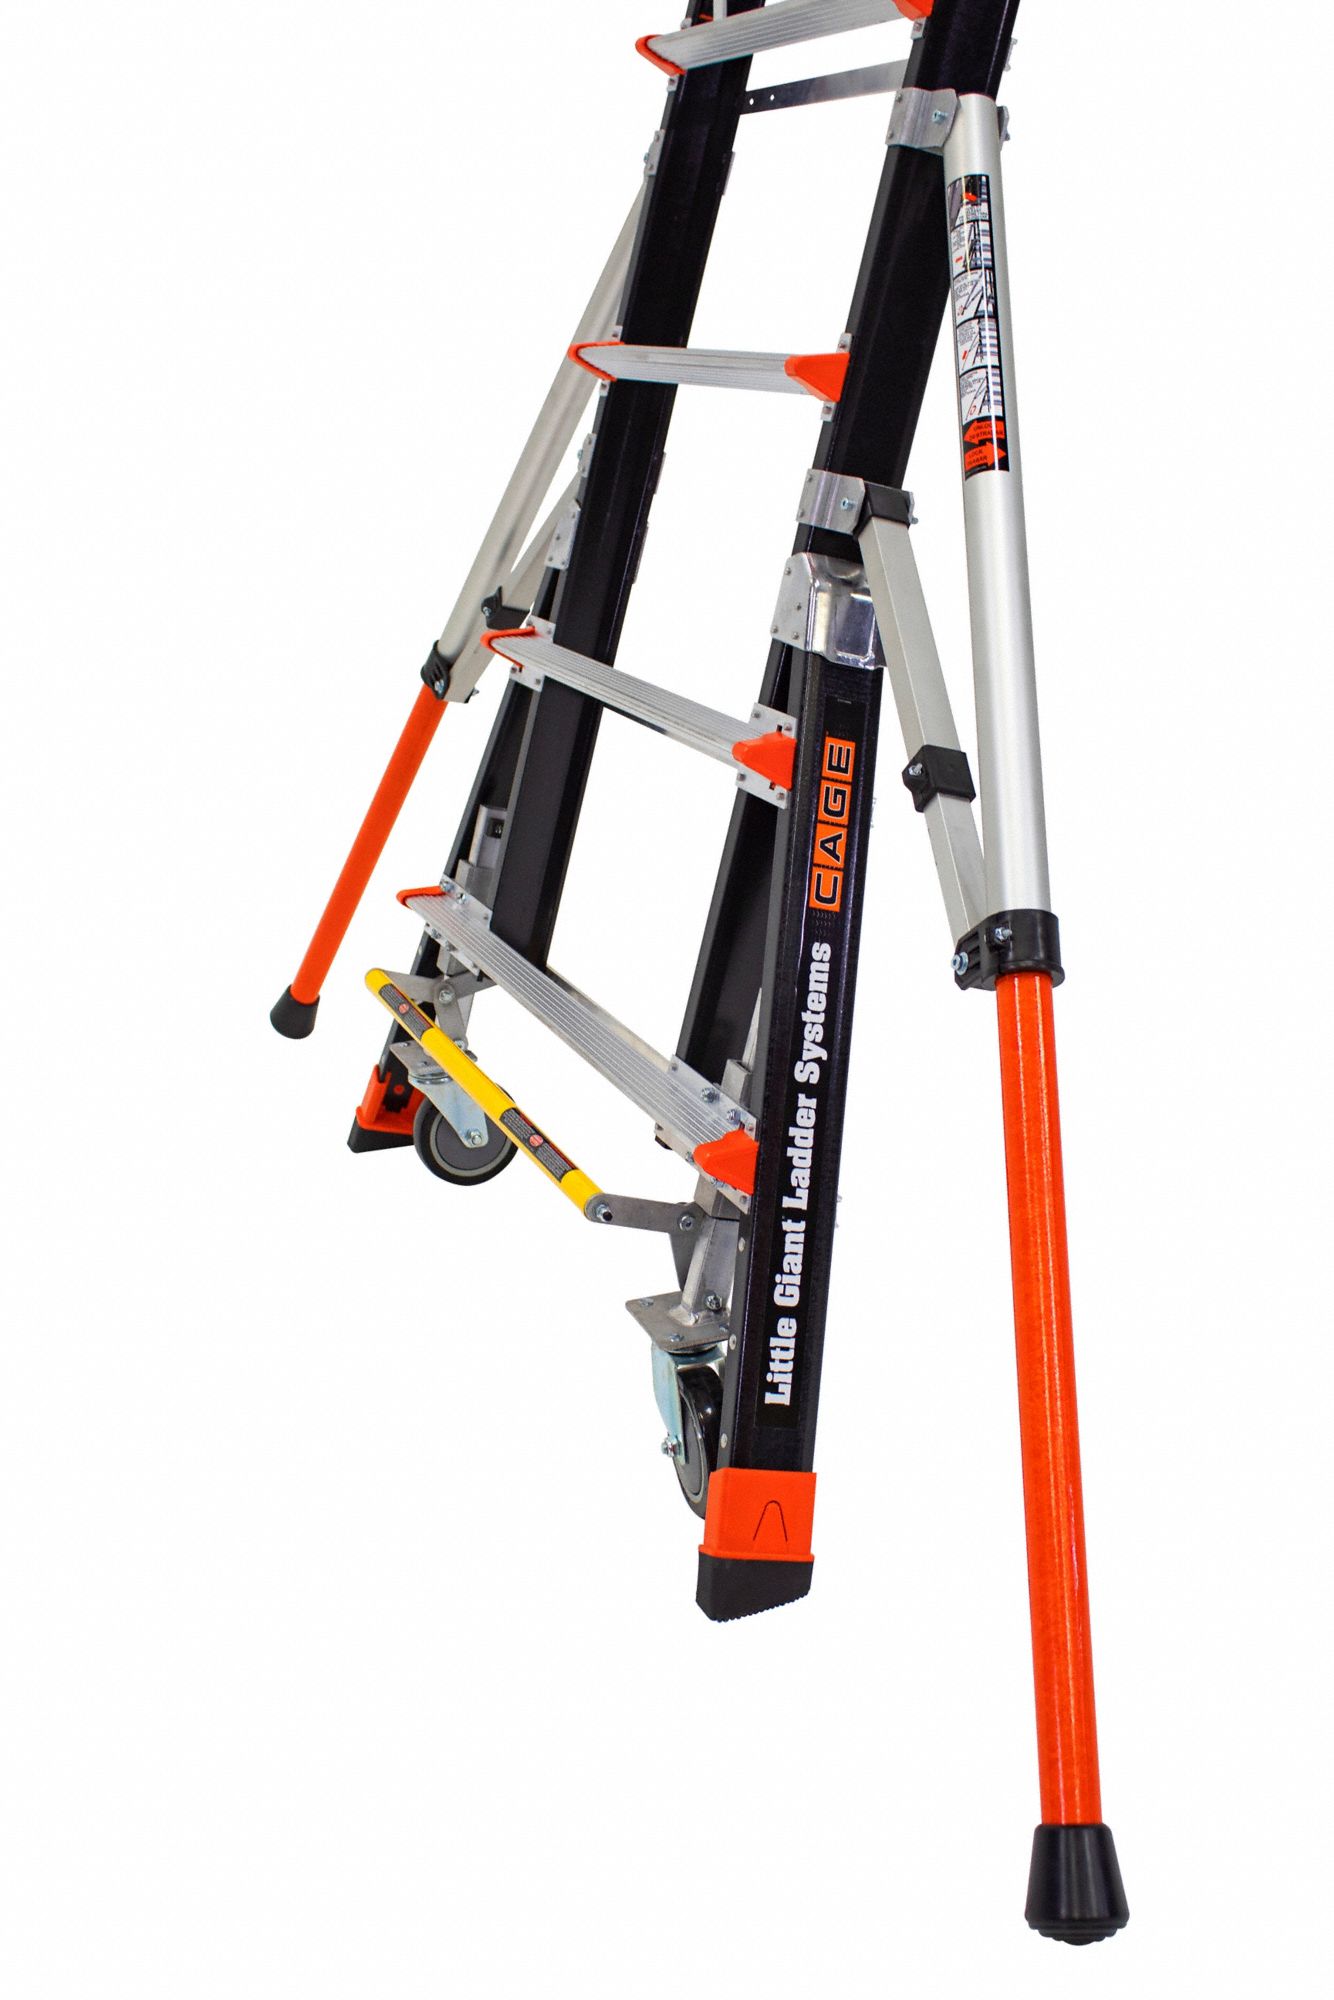 Little Giant Safety Cage 8'-14' w/ Wheel Lift & Ratchet Levelers 